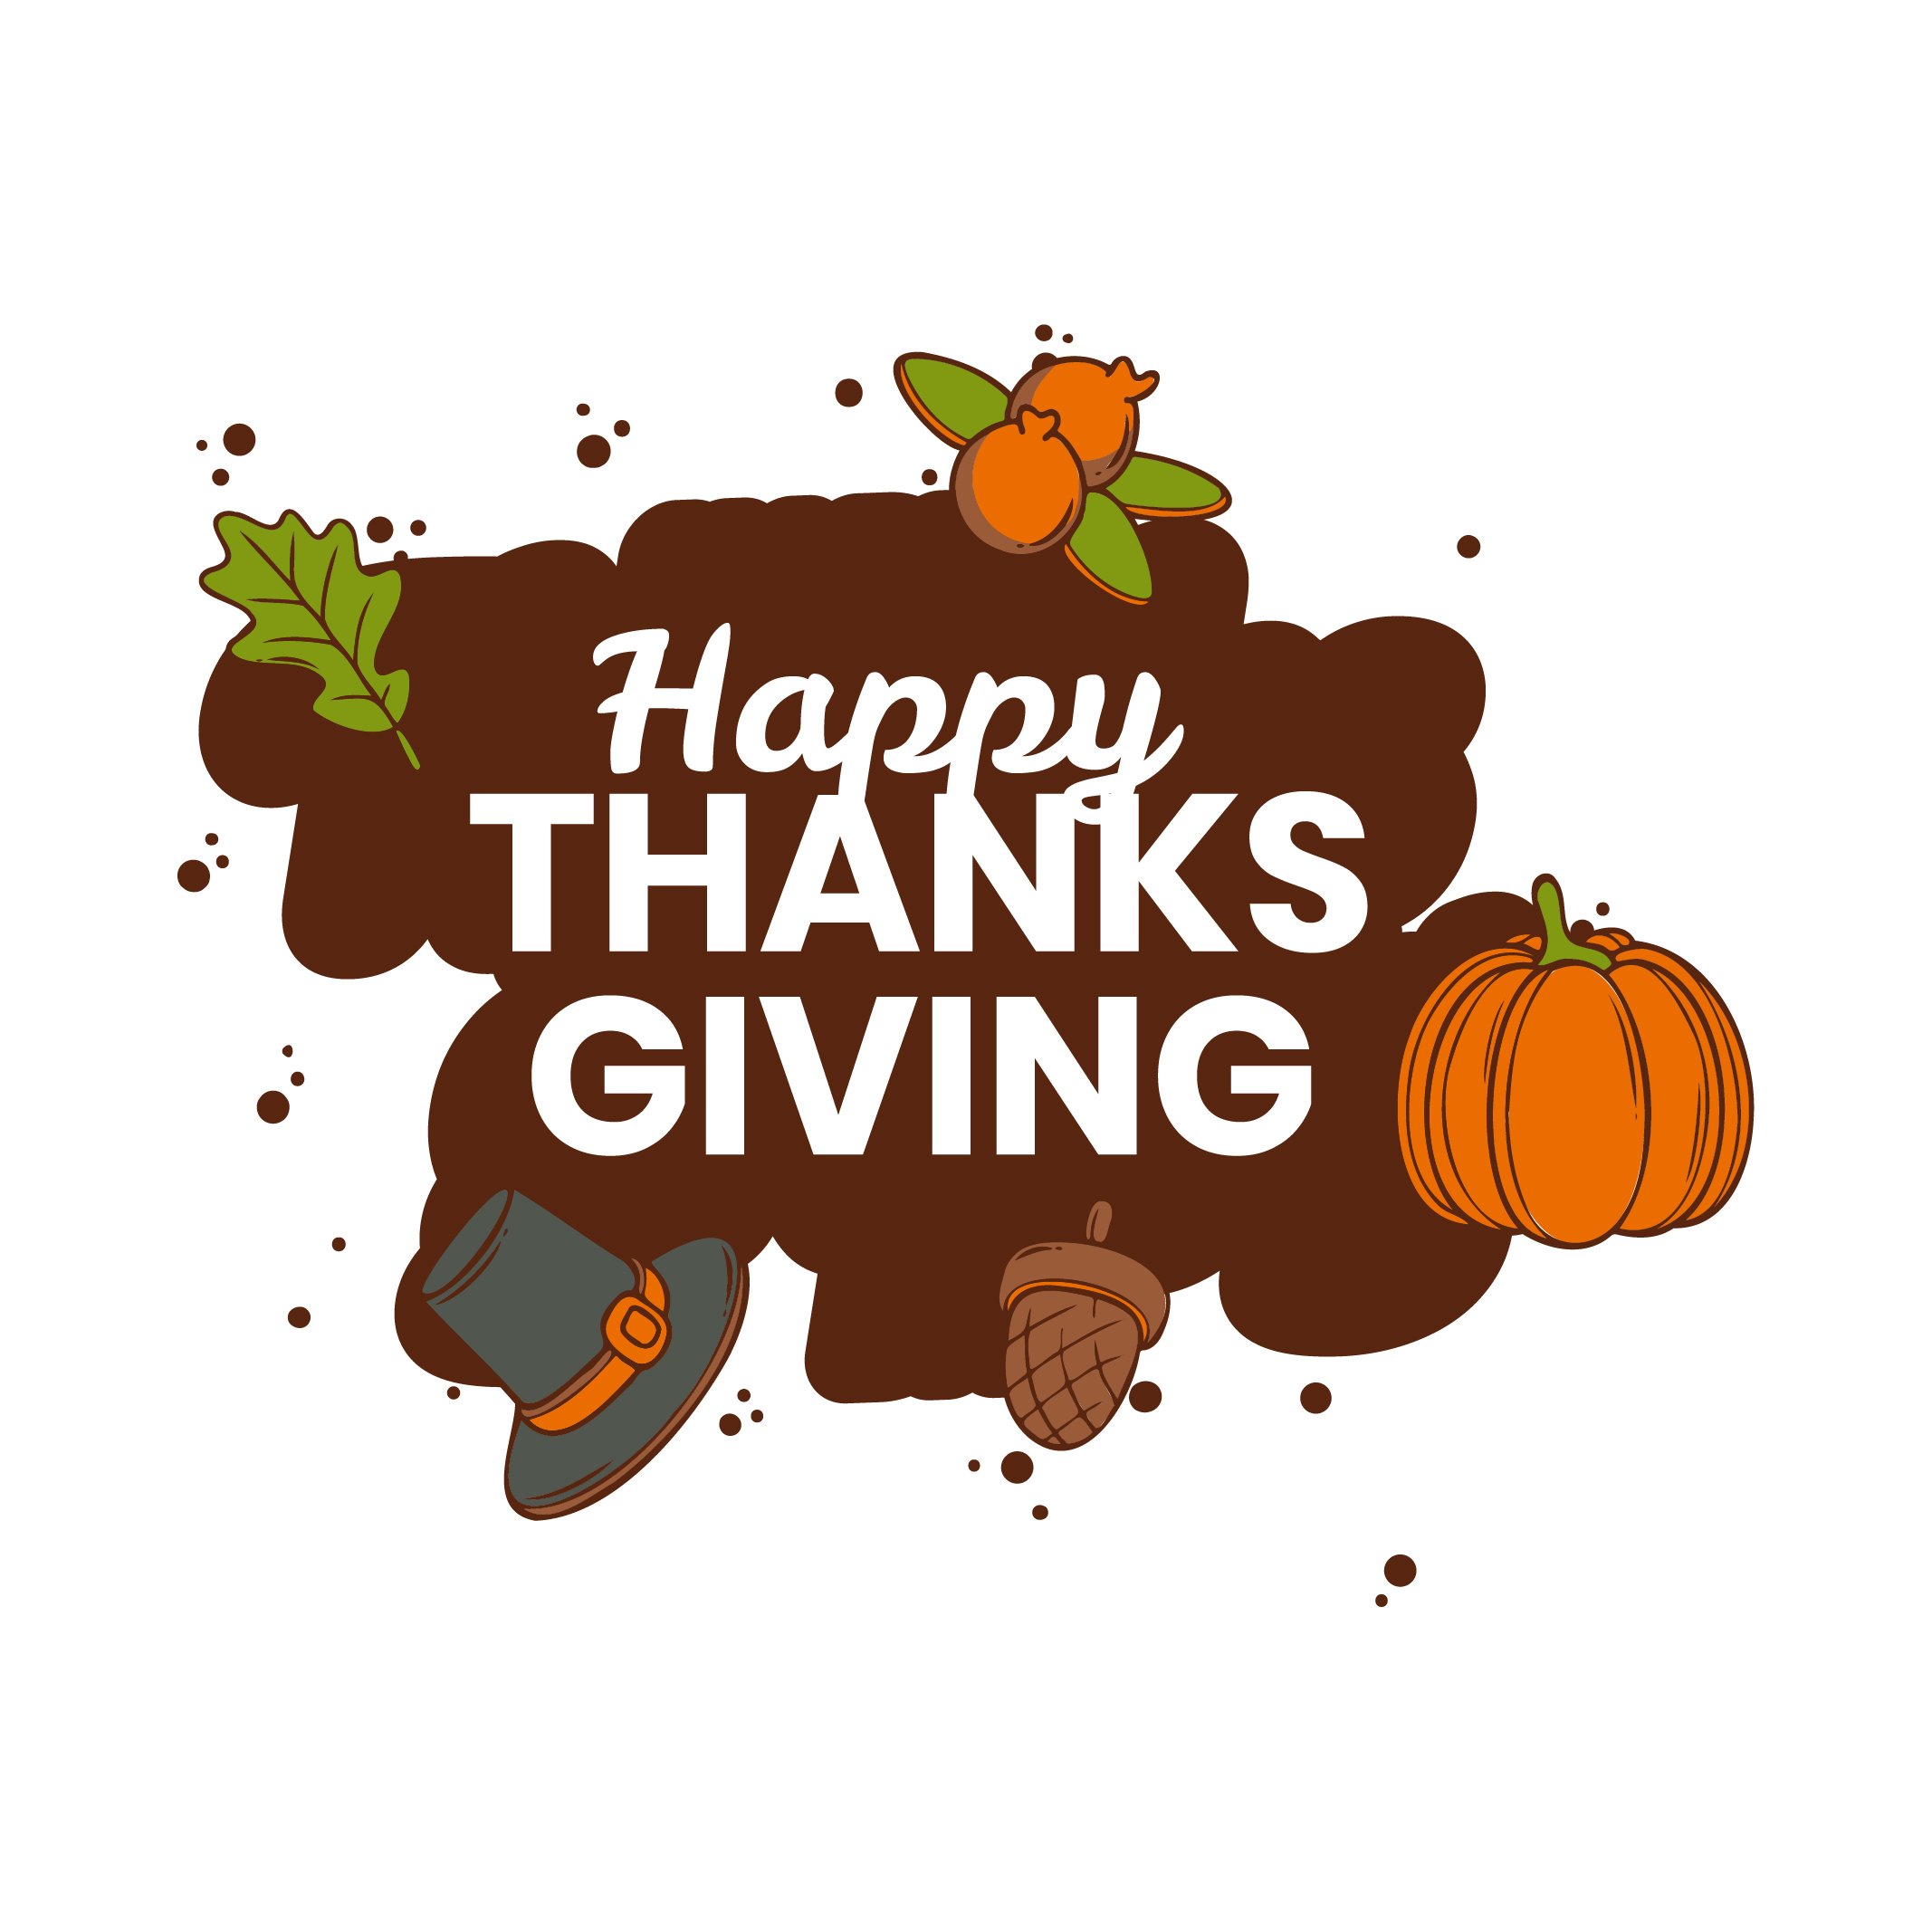 free-thanksgiving-clipart-image-download-in-illustrator-photoshop